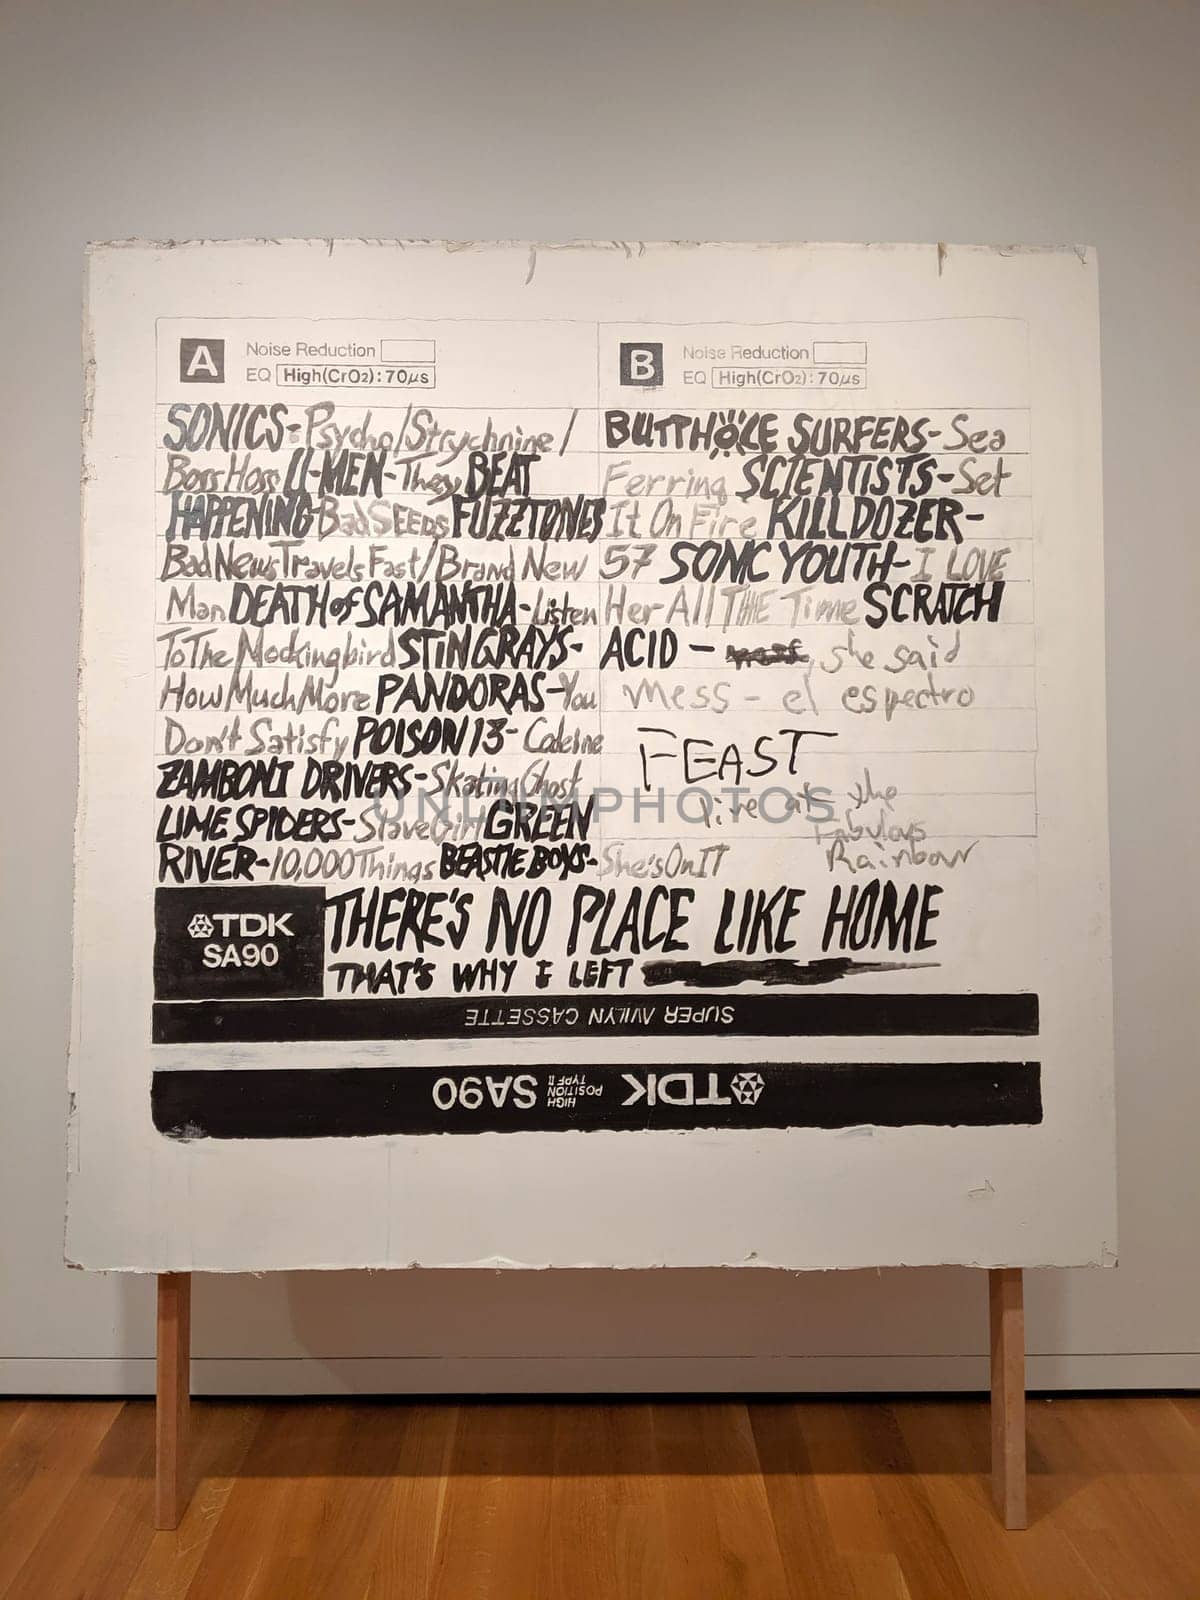 Seattle - May 16, 2019:  Mixtape label artwork displayed at the Seattle Art Museum. The artwork is a black and white label with handwritten text and drawings, featuring the name of bands Bestie Boys, Butthole Surfers and others. The label is torn on the edges and has a black border. The photo is taken from a close-up angle, showing the details and texture of the label.